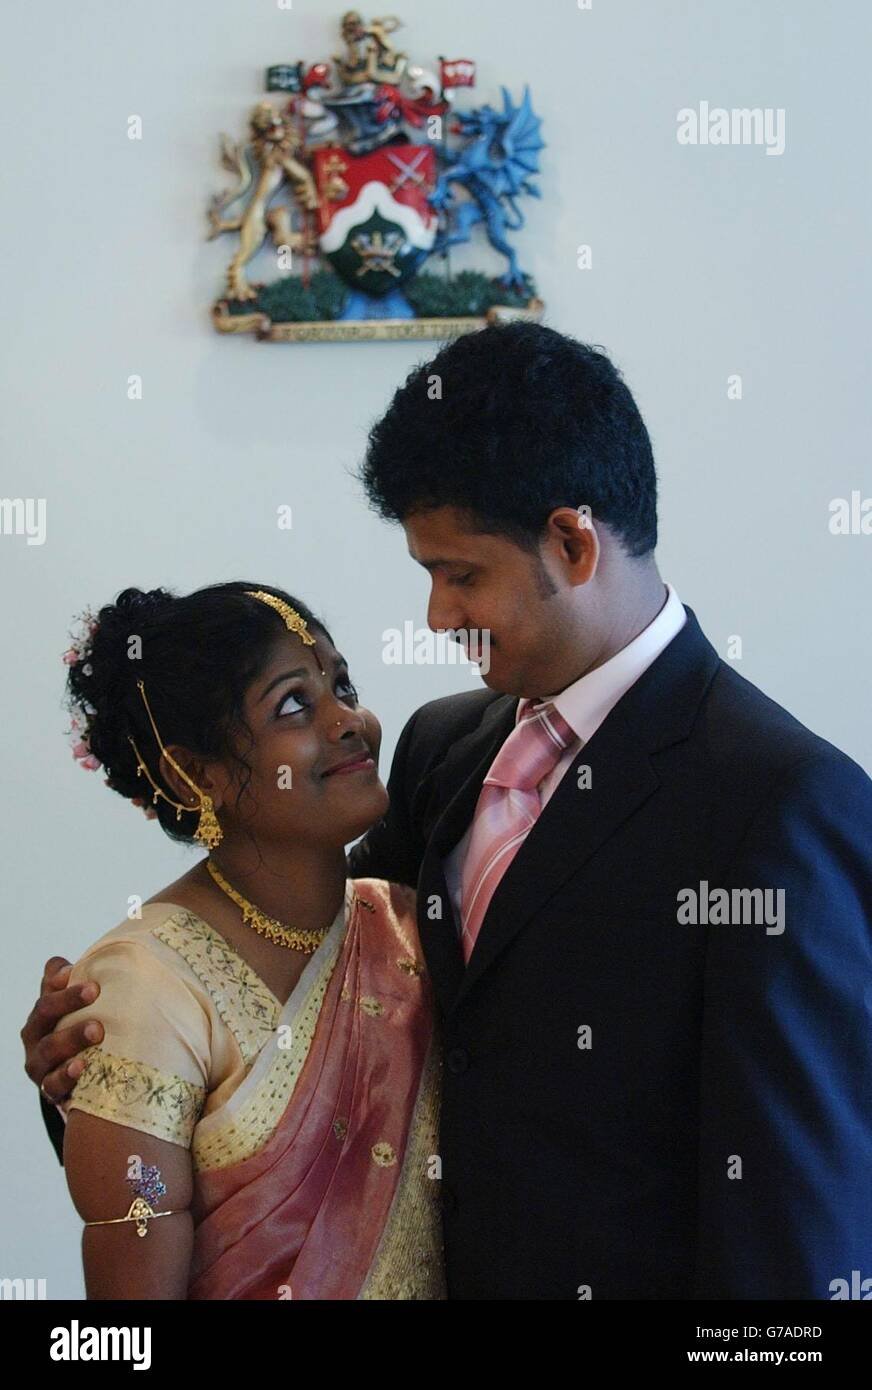 Sivaruban Sivasubramaniam (left) and Sripriya Ramamoorthy celebrate their wedding at Brent Town Hall, which became the first wedding to take place on a Sunday in the UK. It is hoped that the service will be of particular importance to Brent's diverse communities, particularly to those whose cultural traditions mean that they wish to marry on a Sunday. Stock Photo